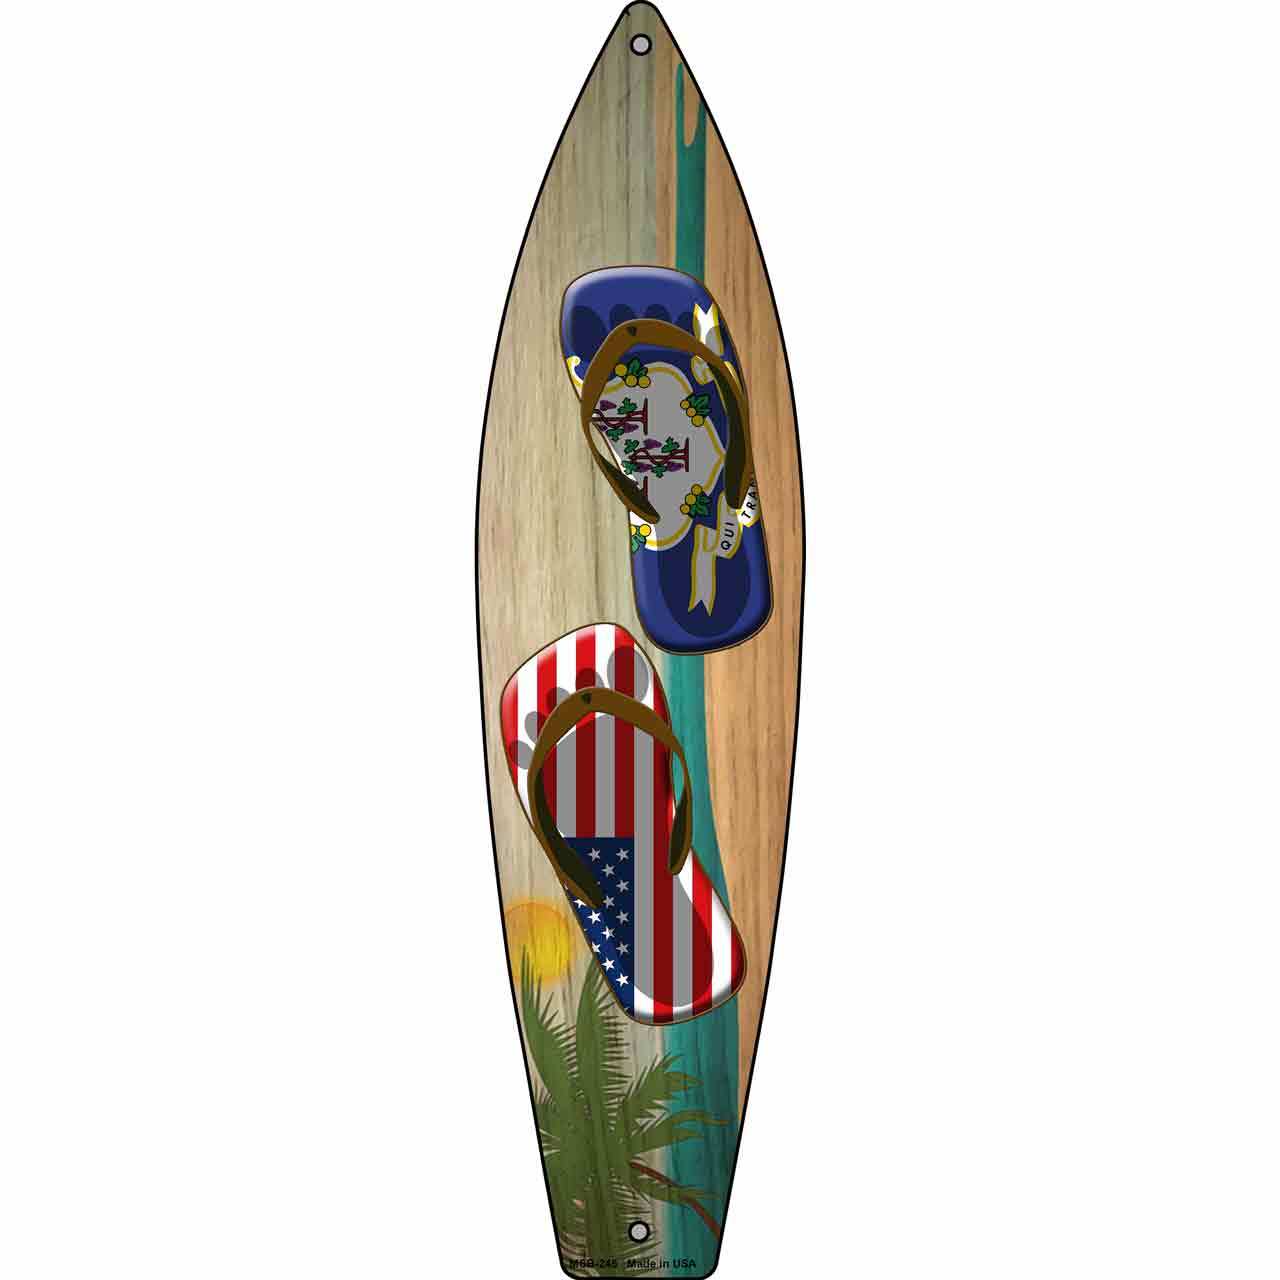 Primary image for Connecticut Flag and US Flag Flip Flop Novelty Mini Metal Surfboard MSB-245